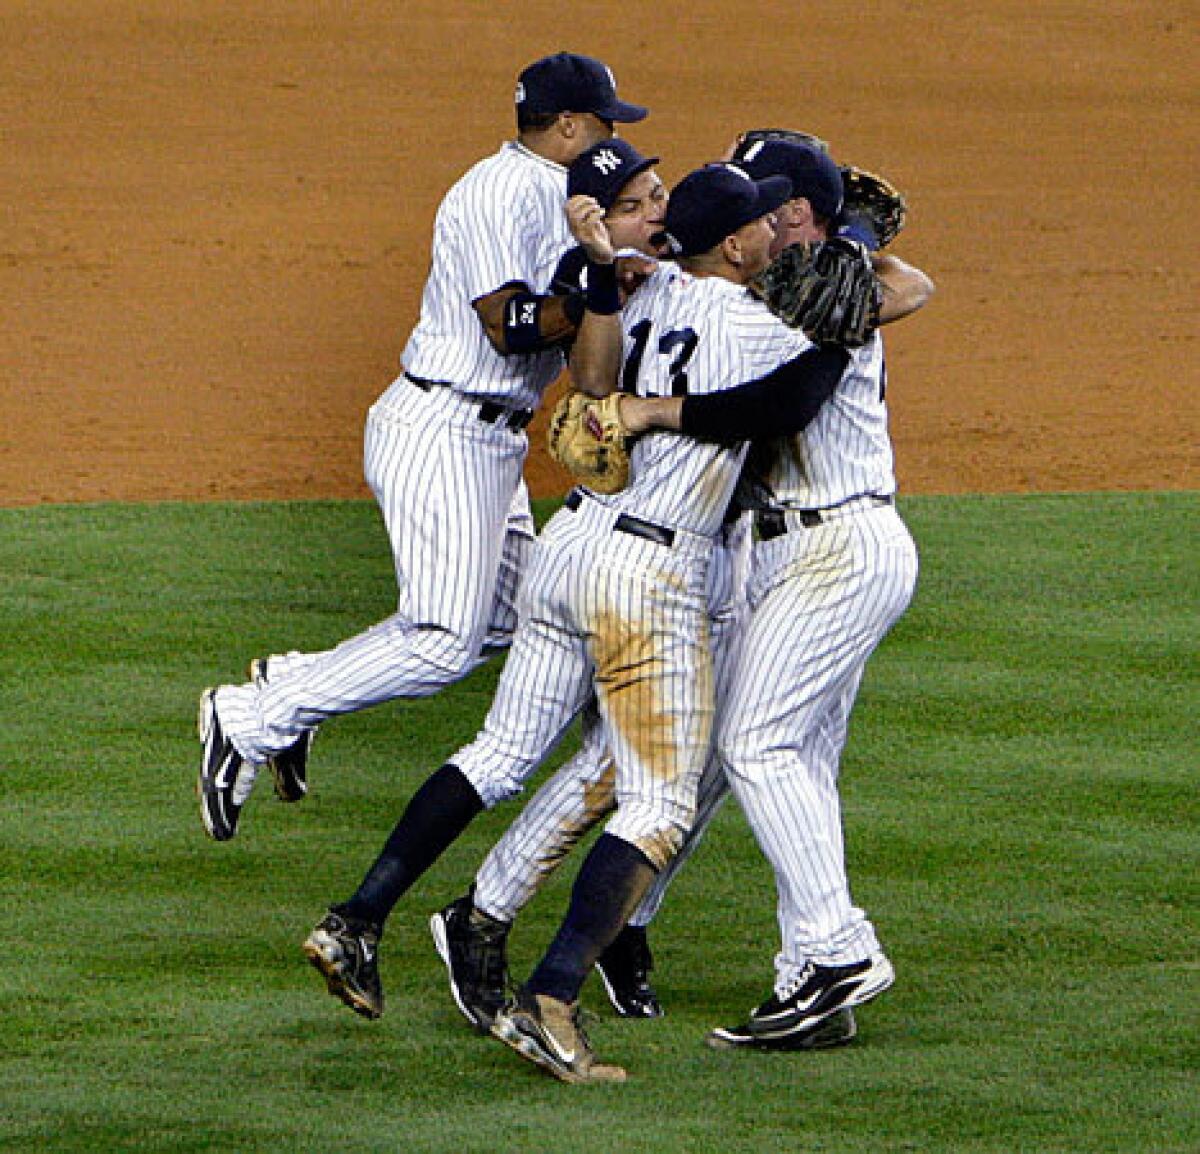 Yankees infielders Robinson Cano, left, Alex Rodriguez (13), Mark Teixeira, right, and Derek Jeter celebrate their 5-2 victory over the Angels in Game 6 of the American League Championship Series at Yankee Stadium on Sunday night that clinched a berth in the World Series.